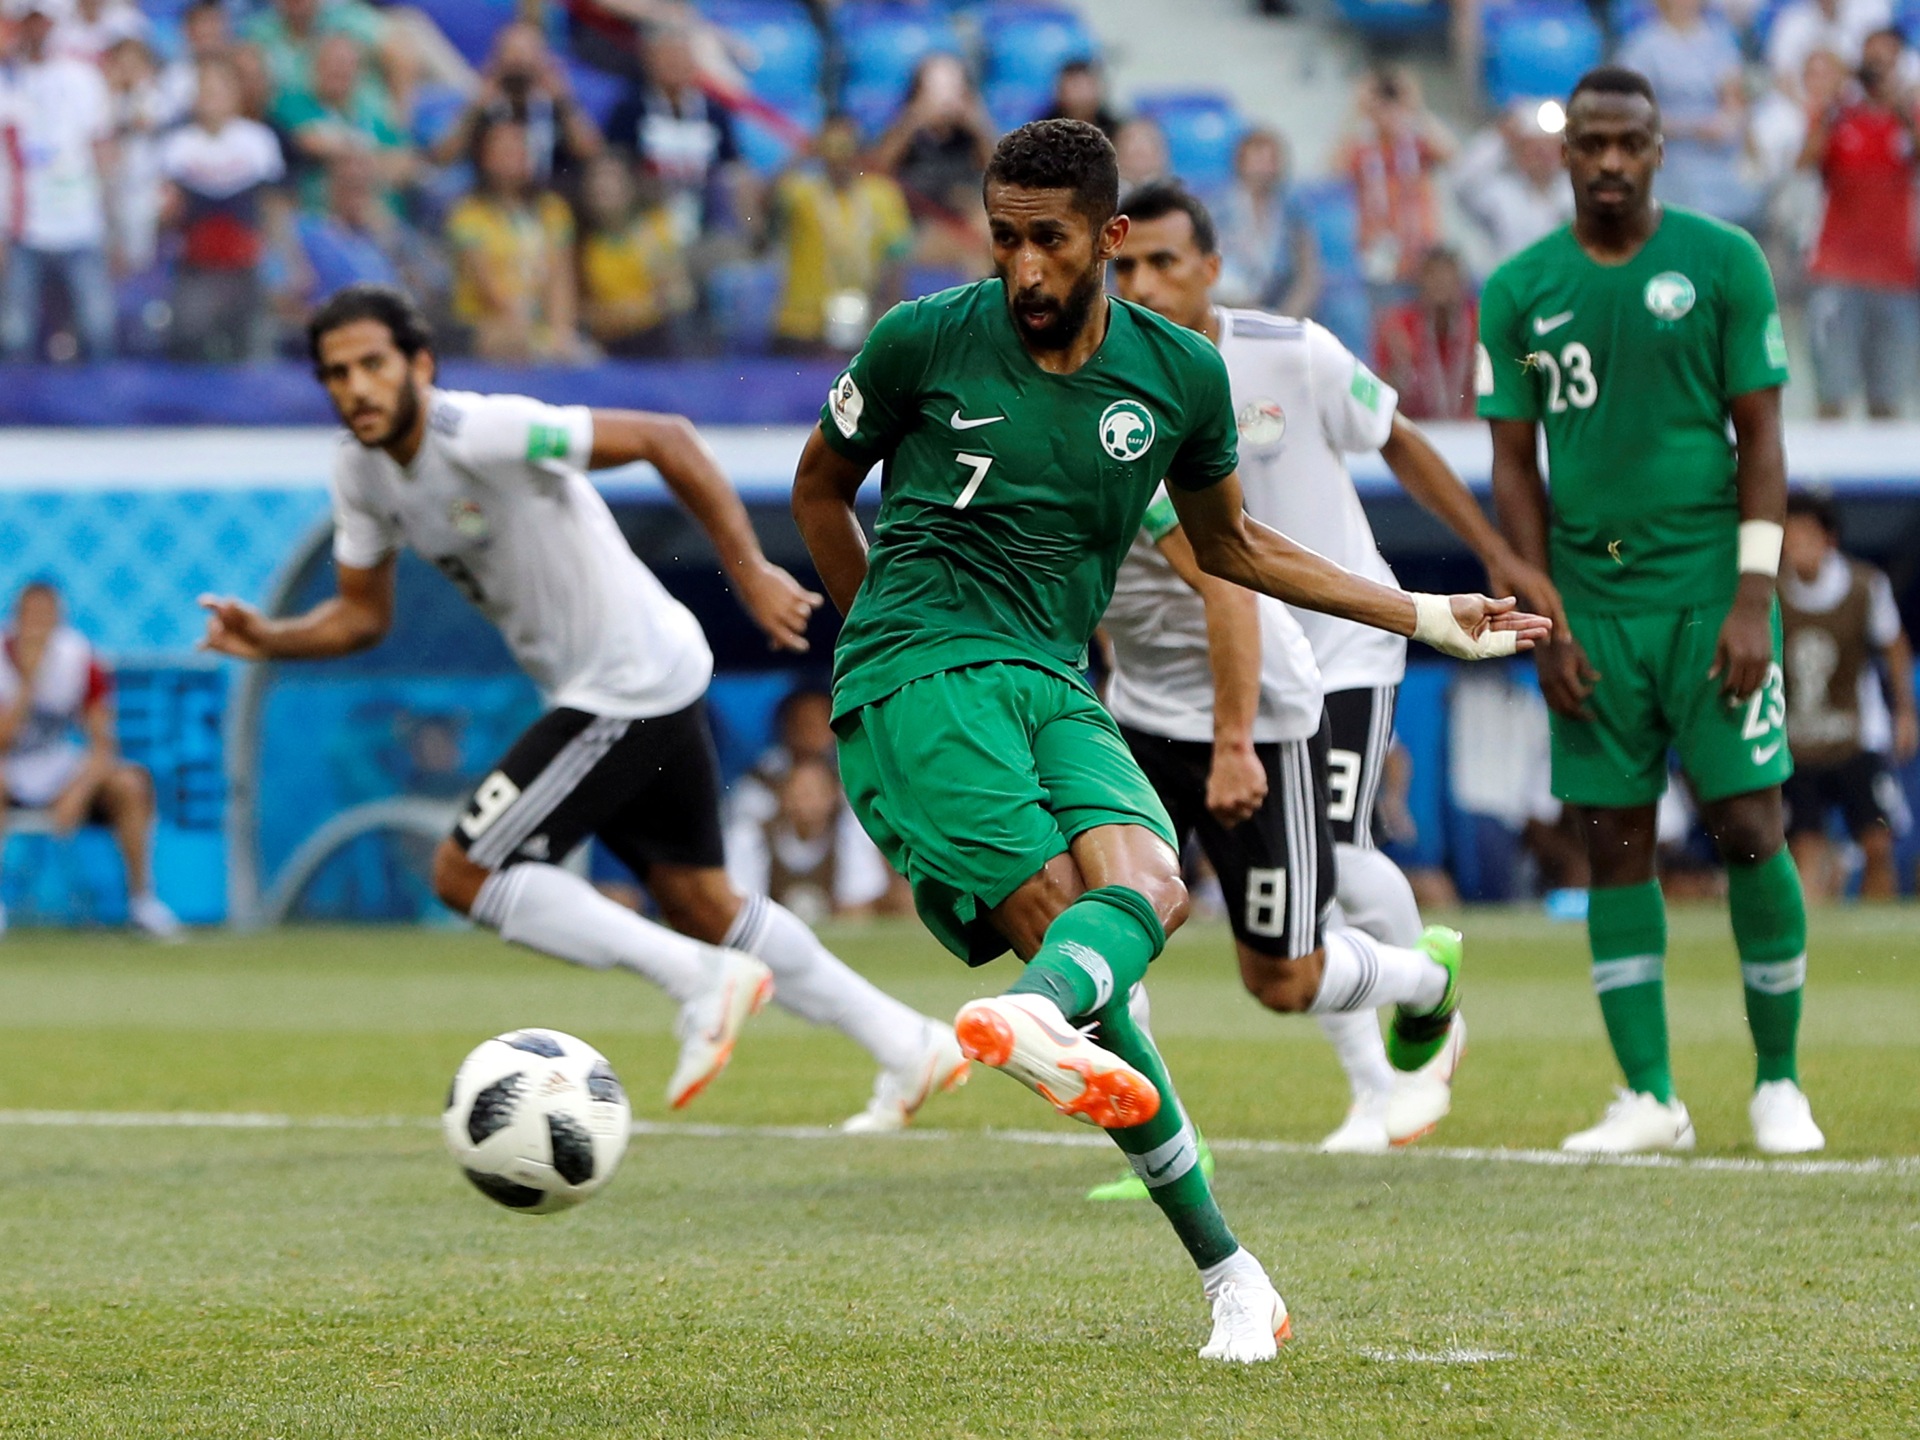 Saudi Arabia relying on close-to-home support at World Cup 2022